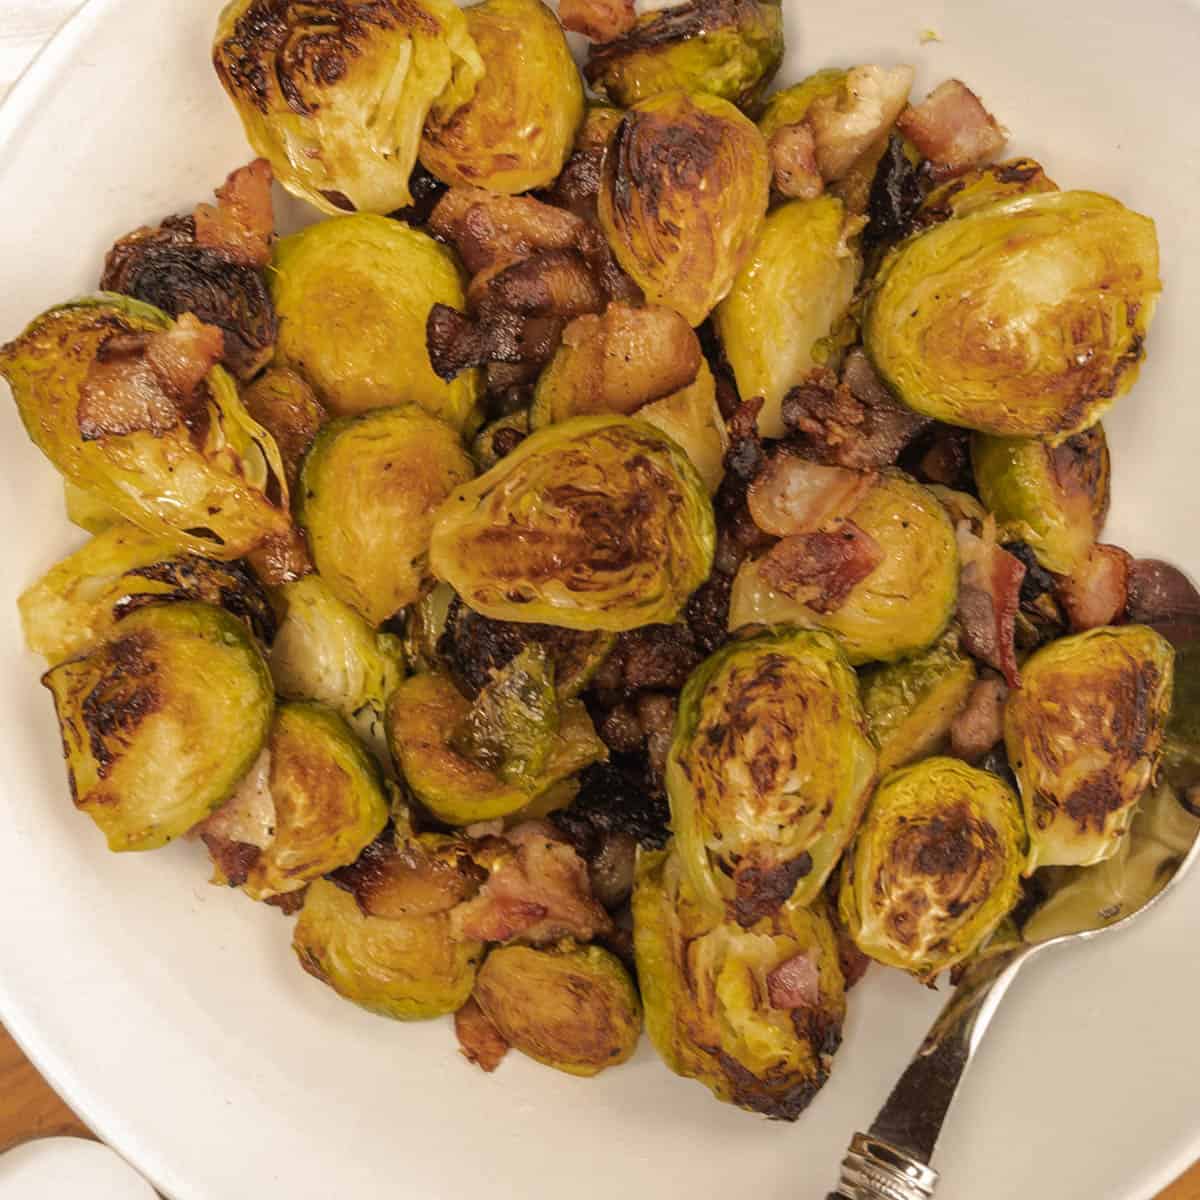 roasted brussel sprouts in a bowl from above